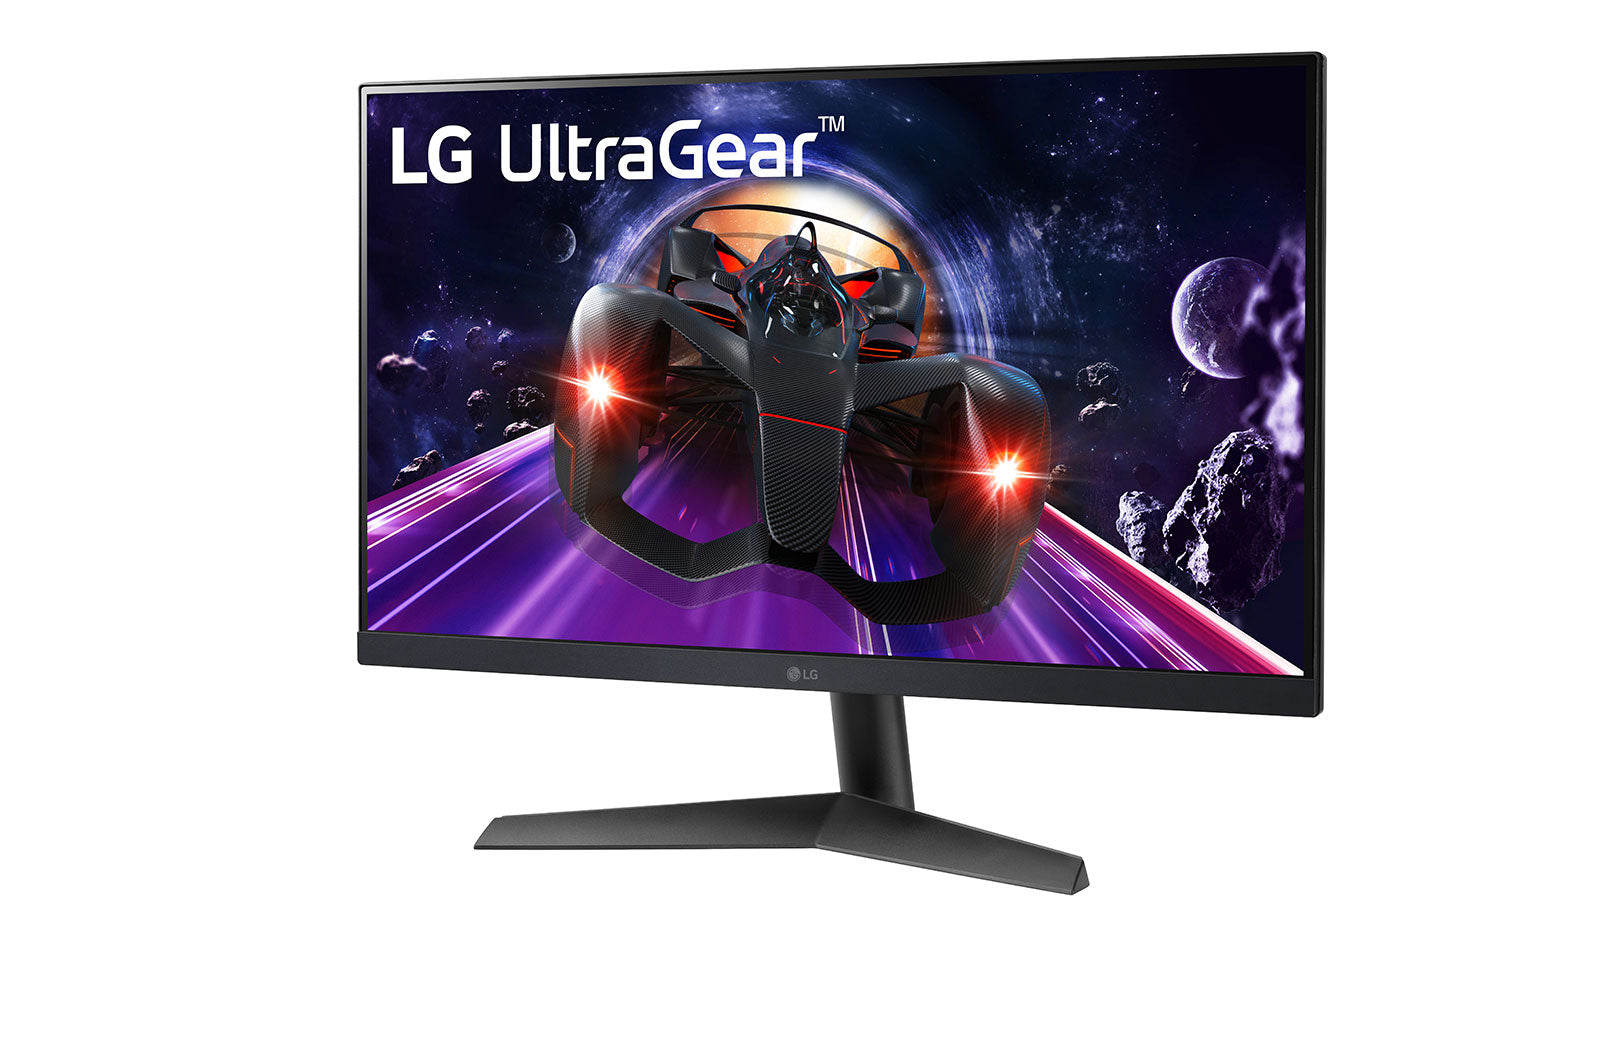 LG 24GN60R  UltraGear FHD IPS 1ms 144Hz HDR Monitor with FreeSync, Dynamic Action Sync, HDR Effect, Motion Blur Reduction Technology, Color Calibrated